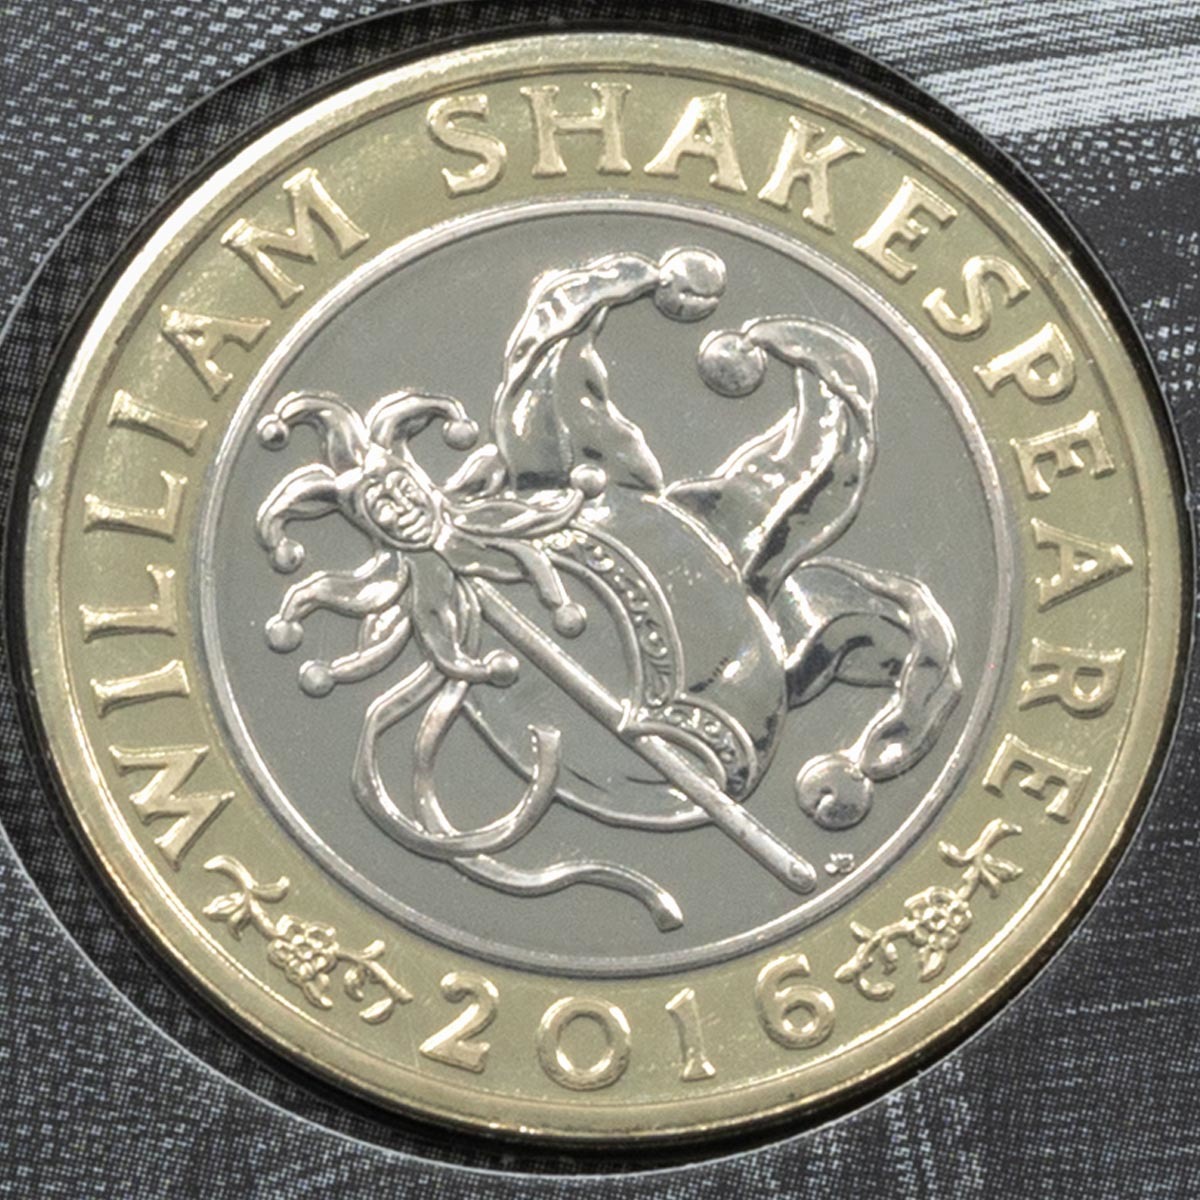 uk16s3bu-2016-william-shakespeare-comedy-tragedy-history-brilliant-uncirculated-two-pound-three-coin-set-001-m